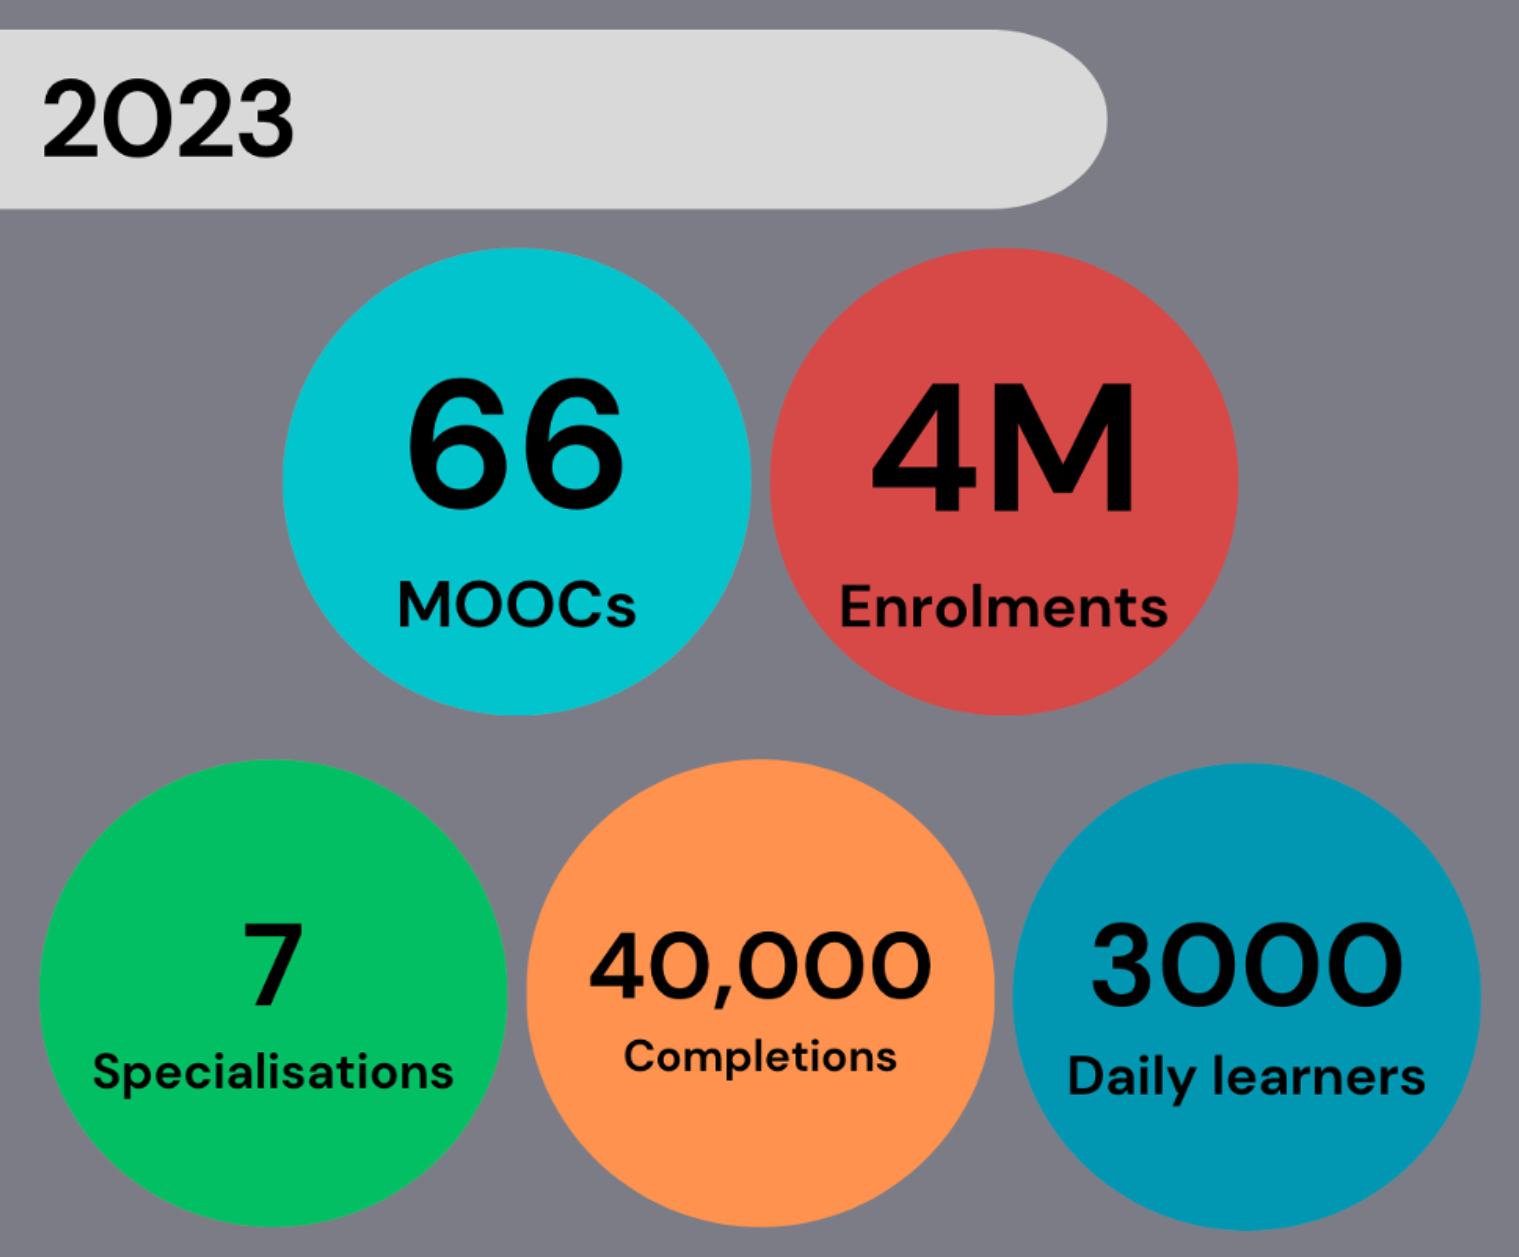 2023: 66 MOOCs, 4 million enrolments, 7 specialisations, 40,000 completions, 3000 daily learners.